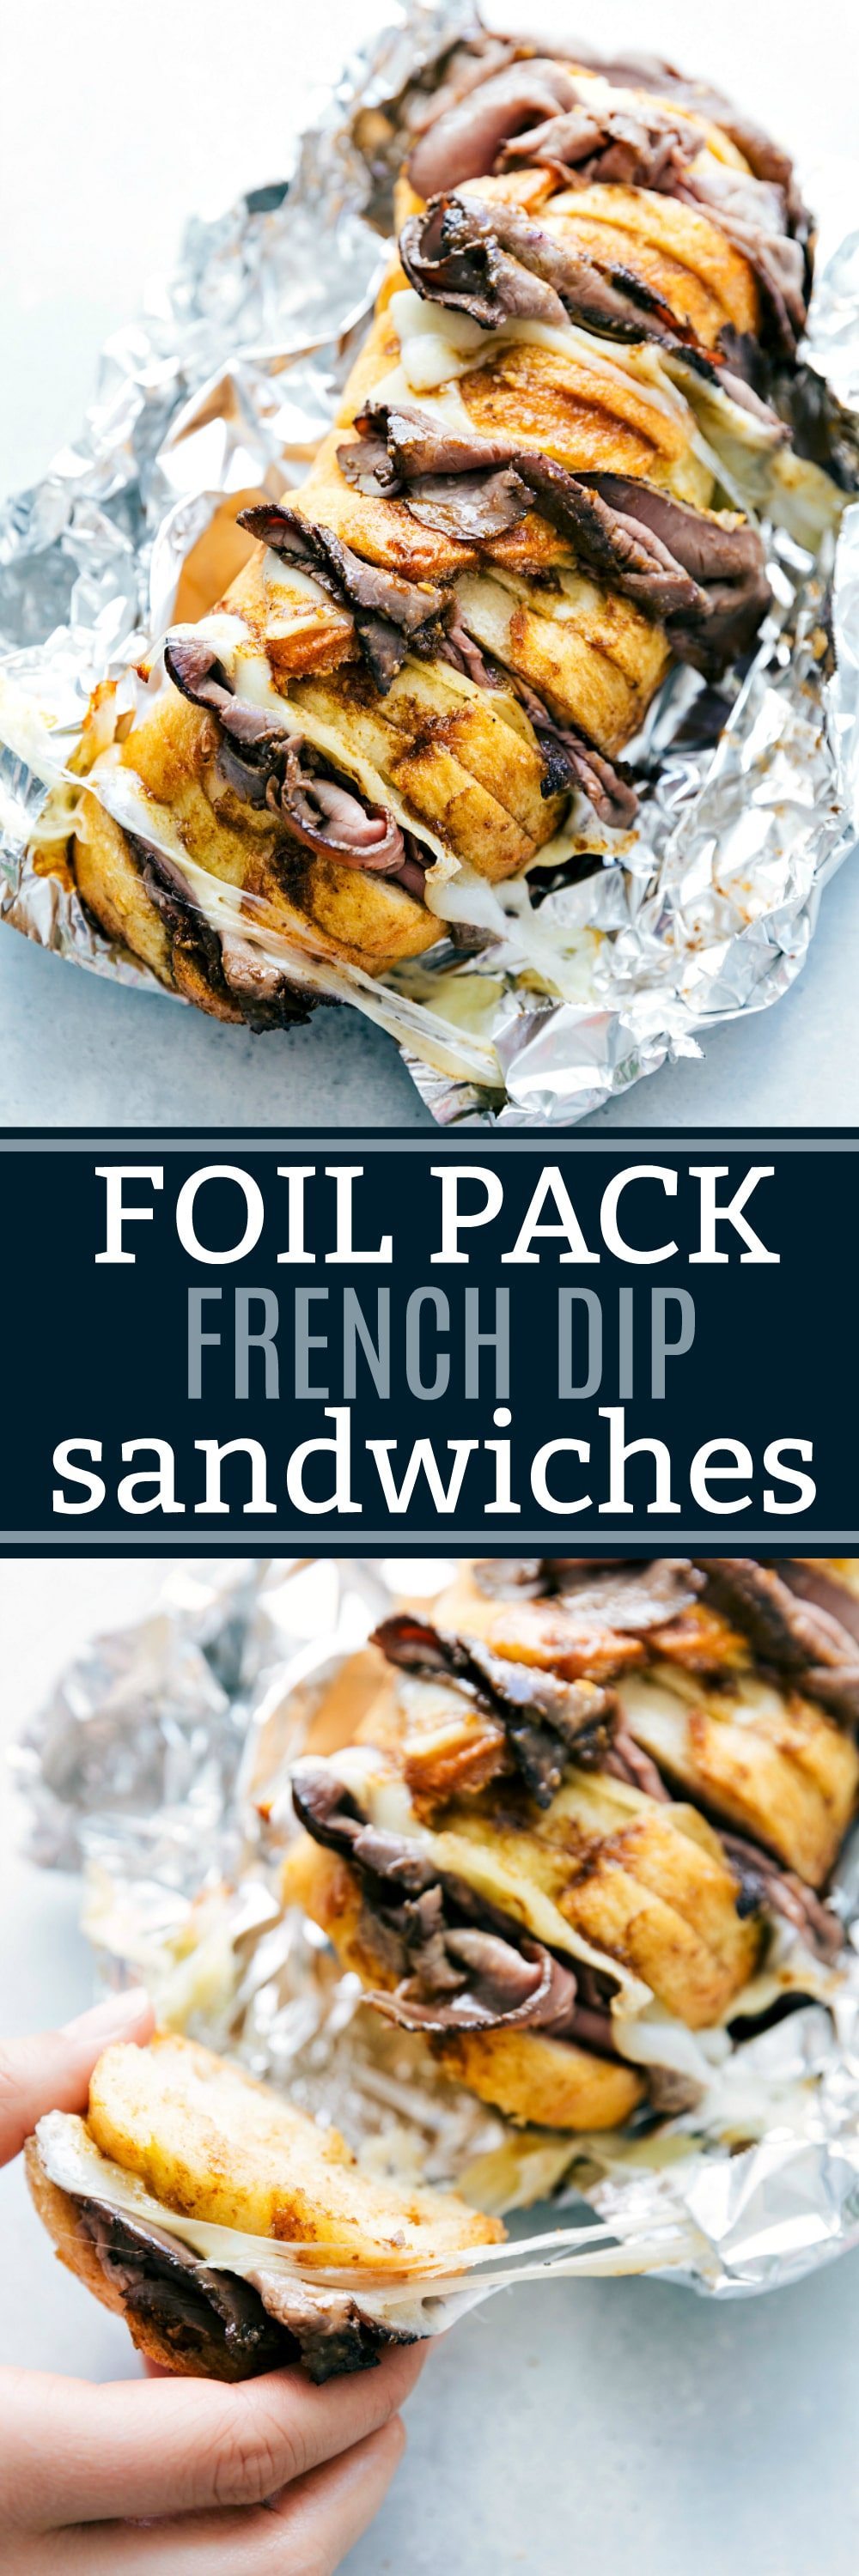 FOIL PACK French Dip Sandwiches! You will be blown away with how good and how EASY these are! Everyone loves them!! chelseasmessyapron.com